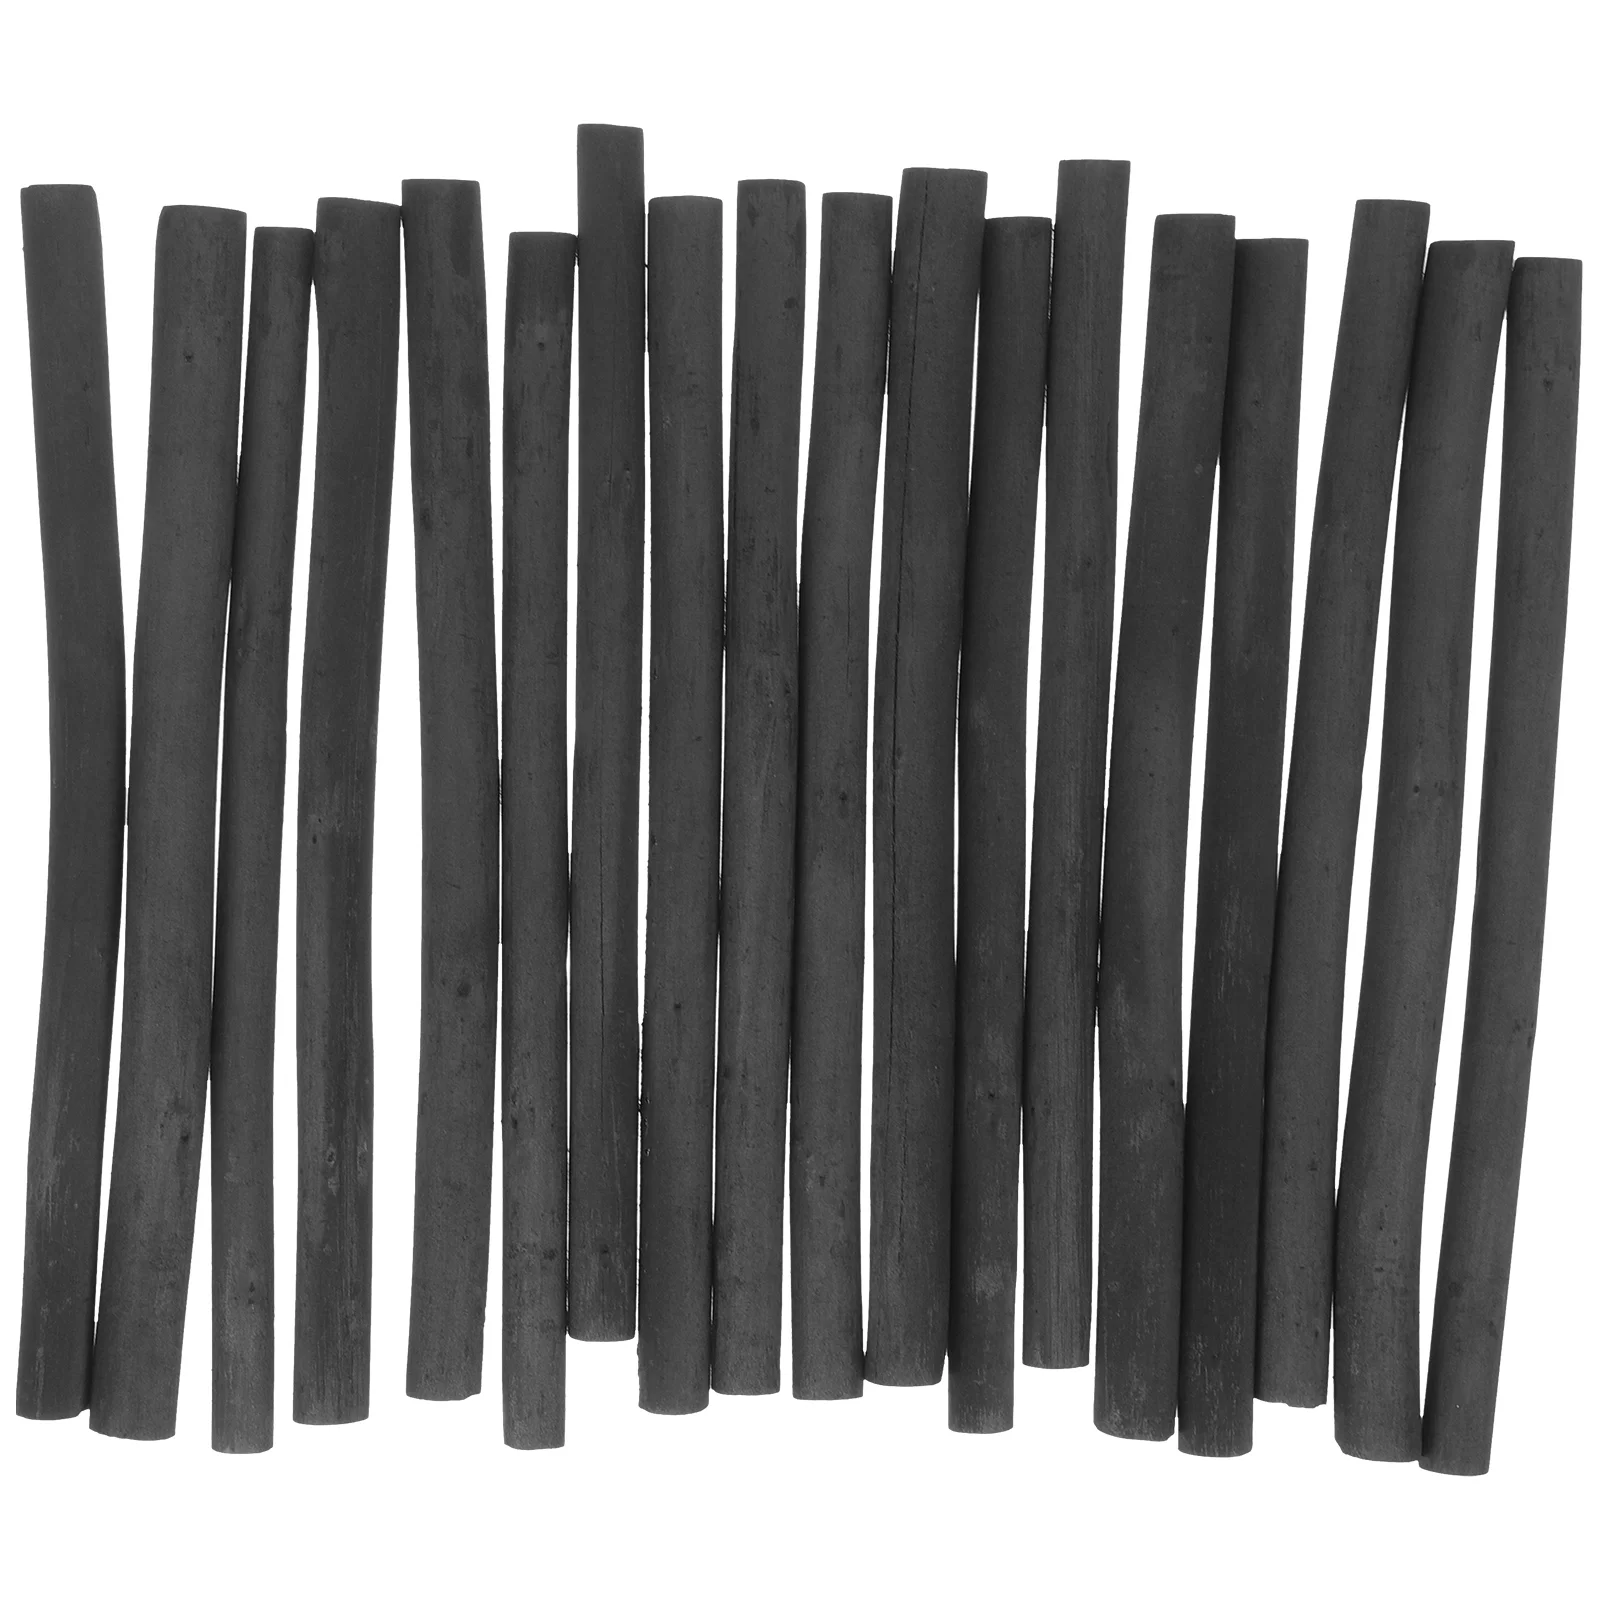 

20Pcs Shading Sketching Charcoal Durable Charcoal Sticks Hobbyist Compressed Willow Charcoal